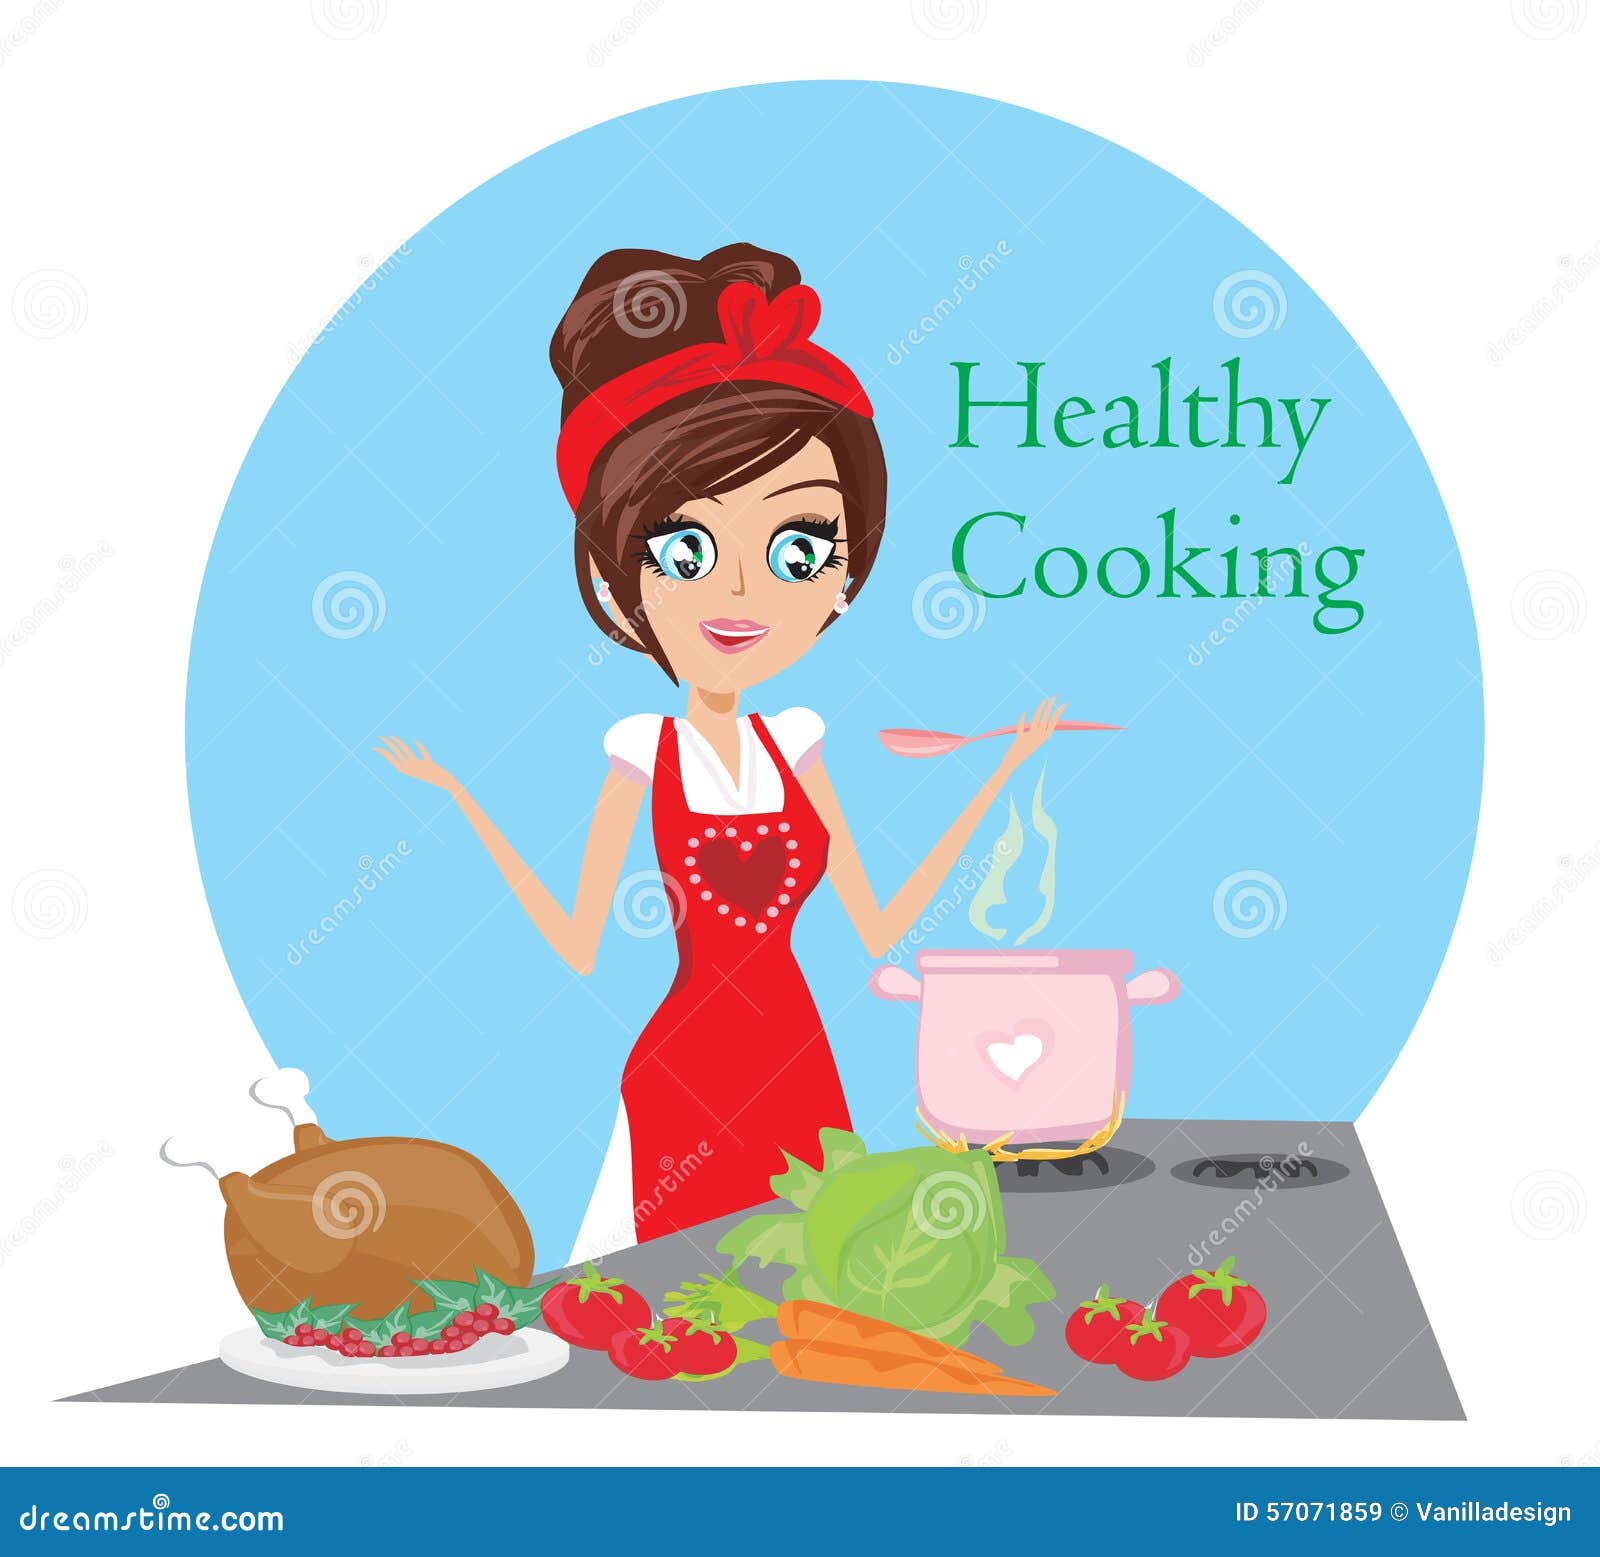 chicken lady clipart - photo #8